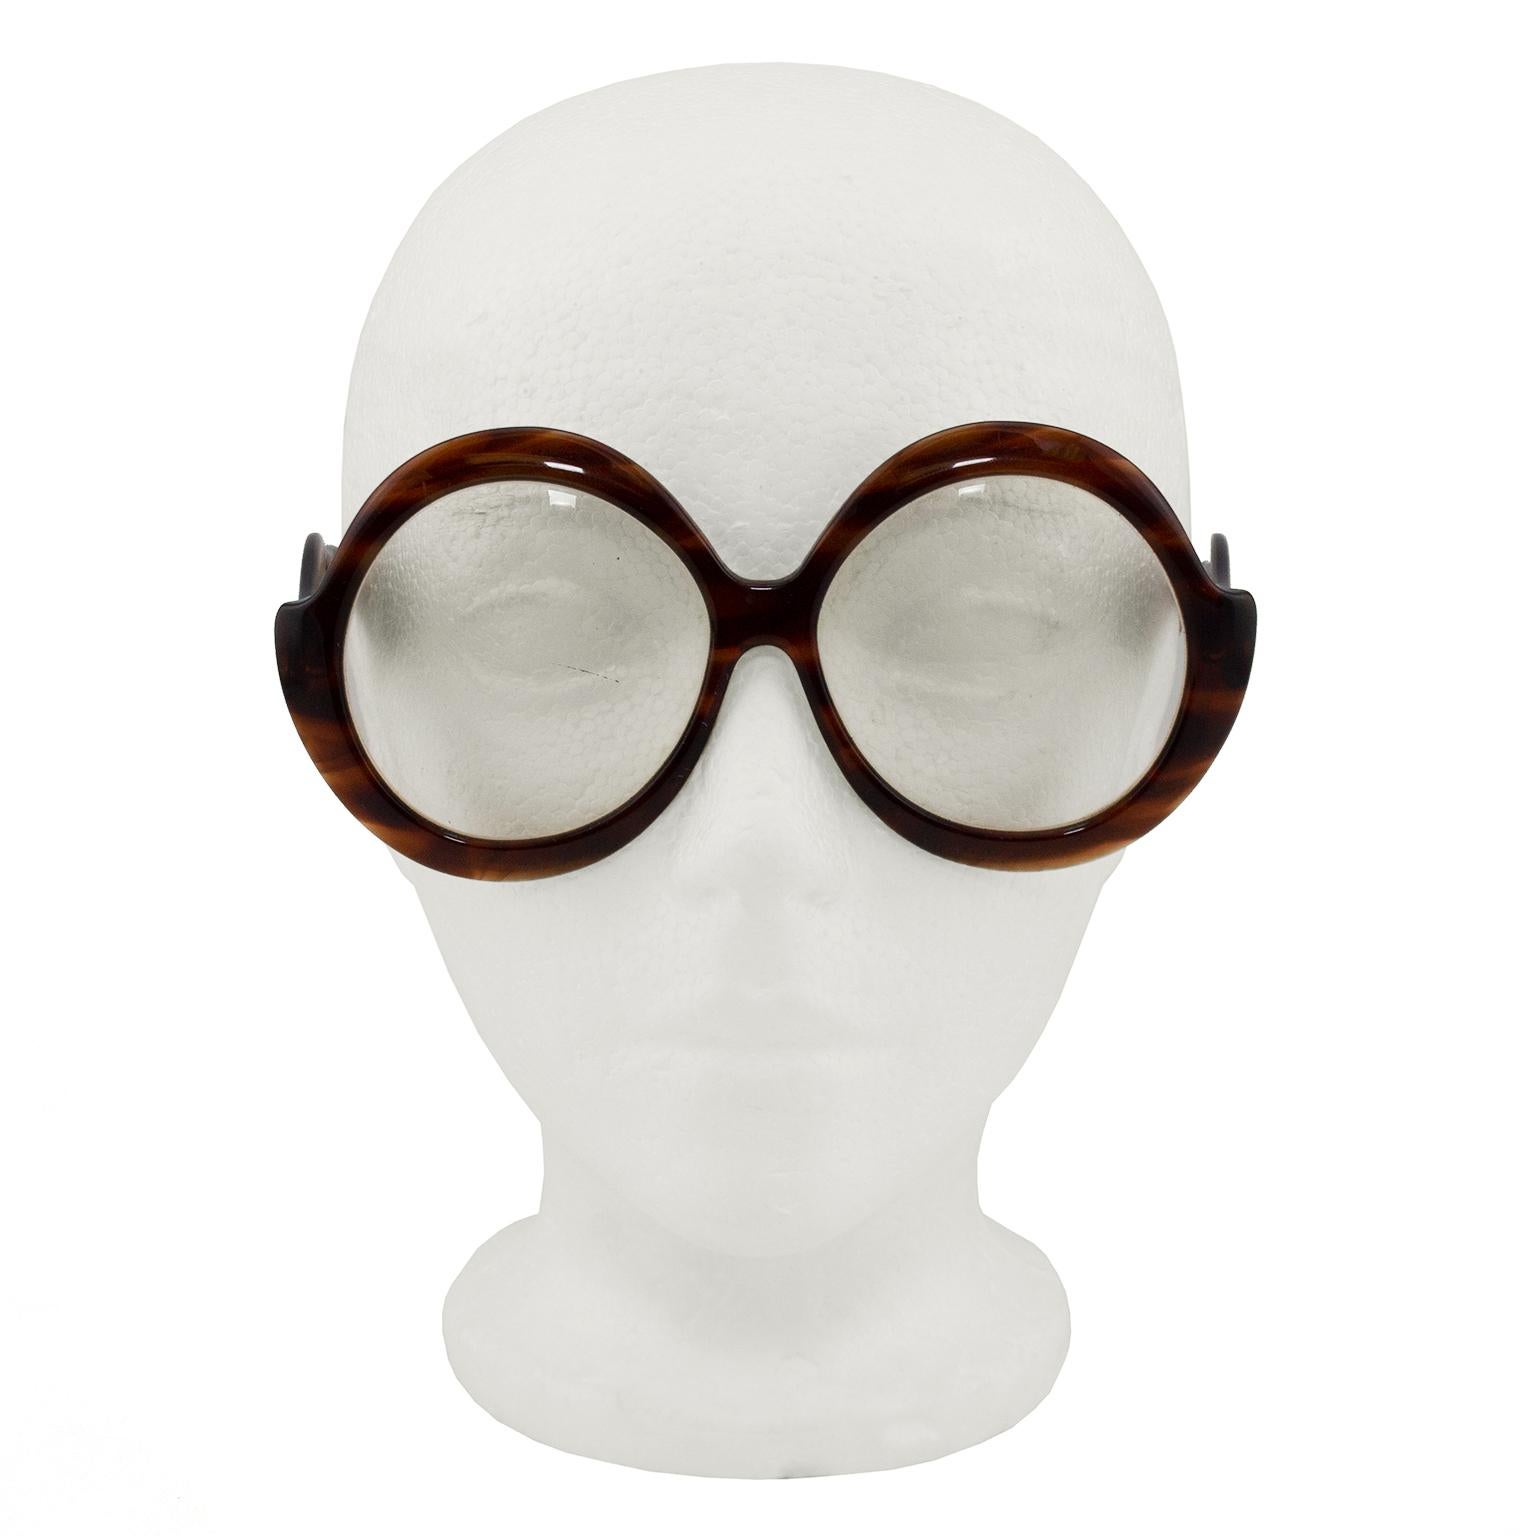 Mod and fun tortoise shell glasses from the 1960s, made by Ultra Designs by Brandy. Called the 